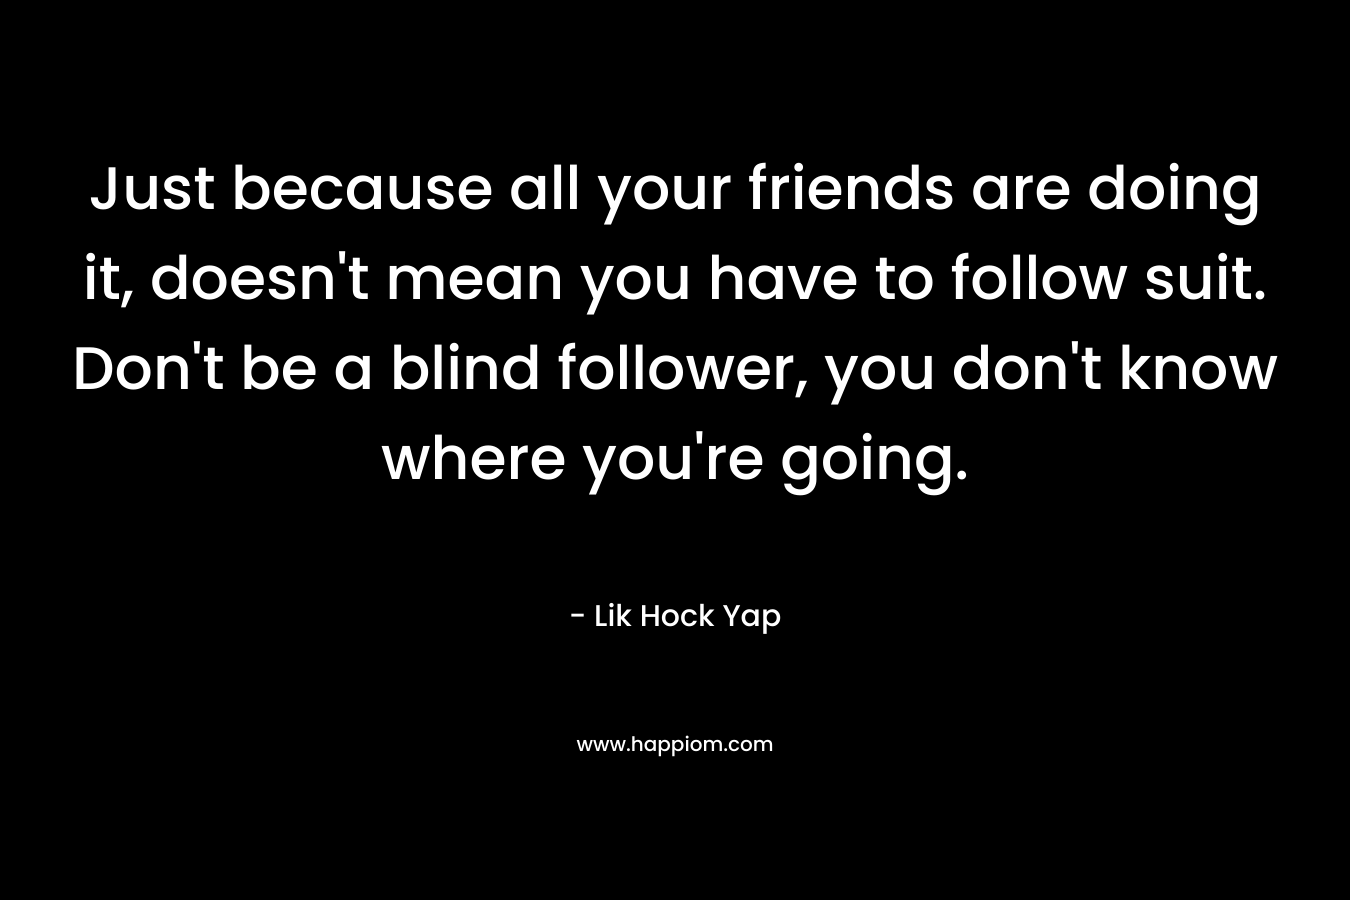 Just because all your friends are doing it, doesn't mean you have to follow suit. Don't be a blind follower, you don't know where you're going.